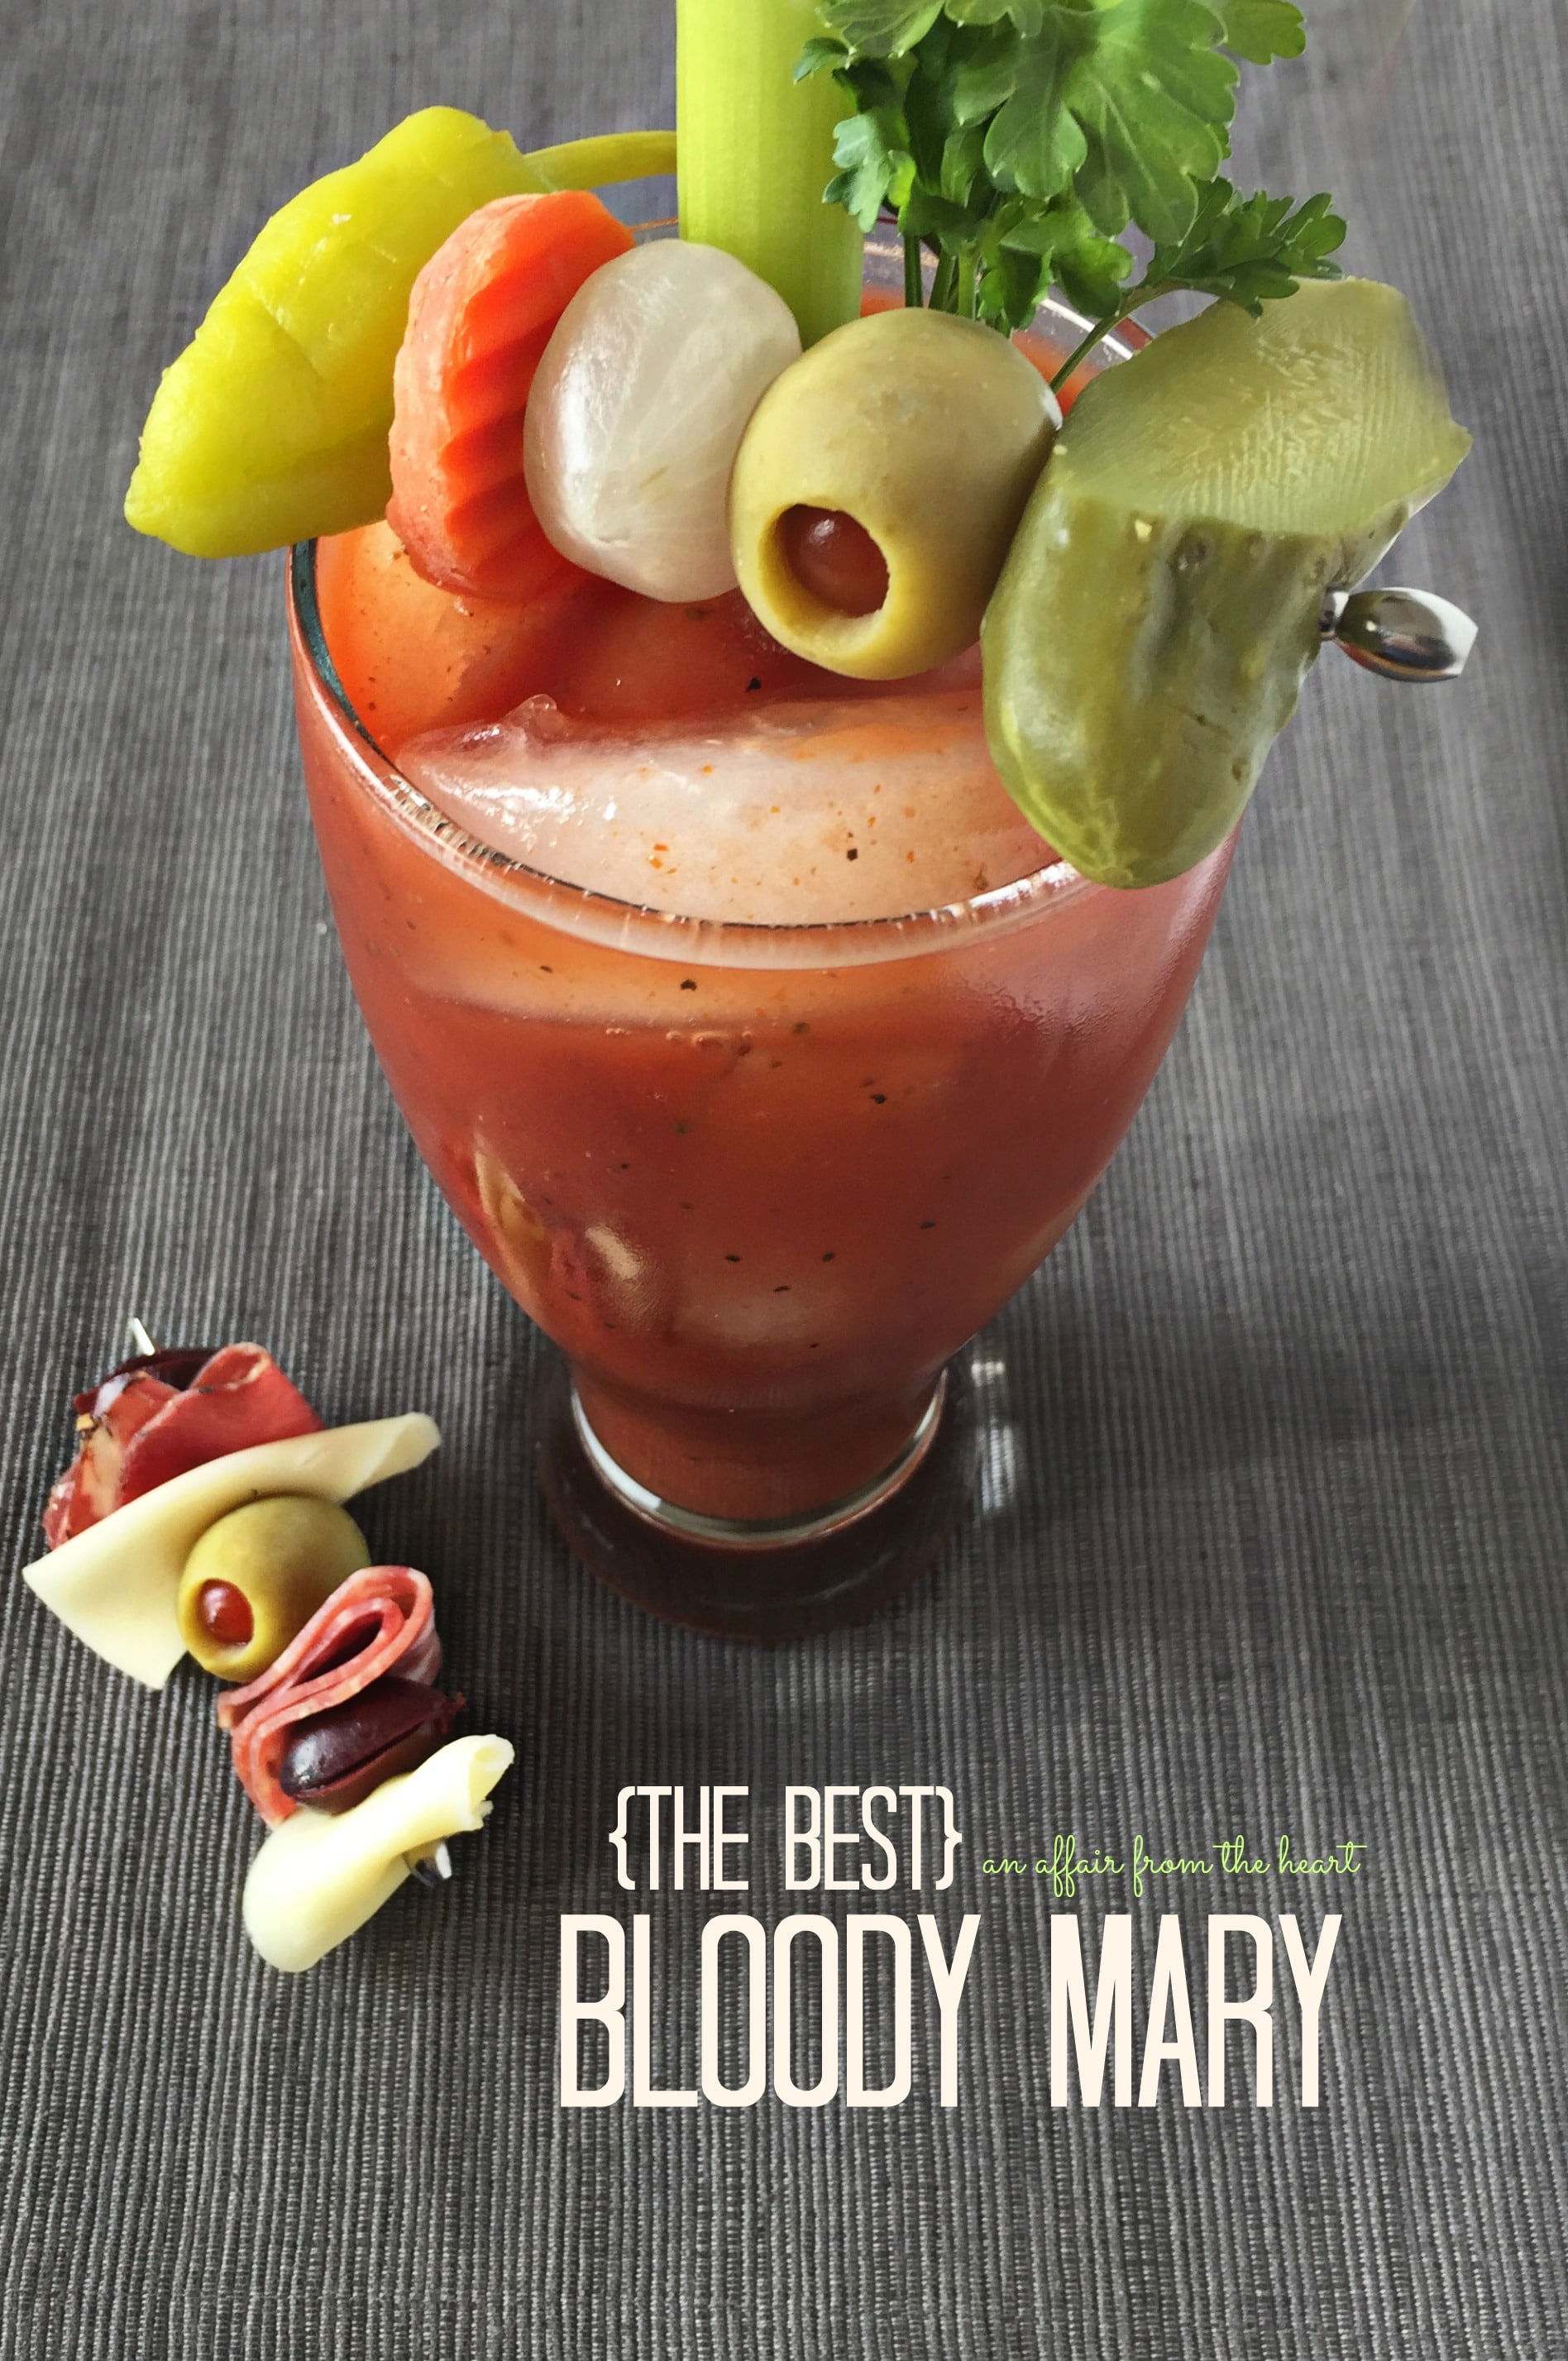 The Best Bloody Mary,How To Make Bread